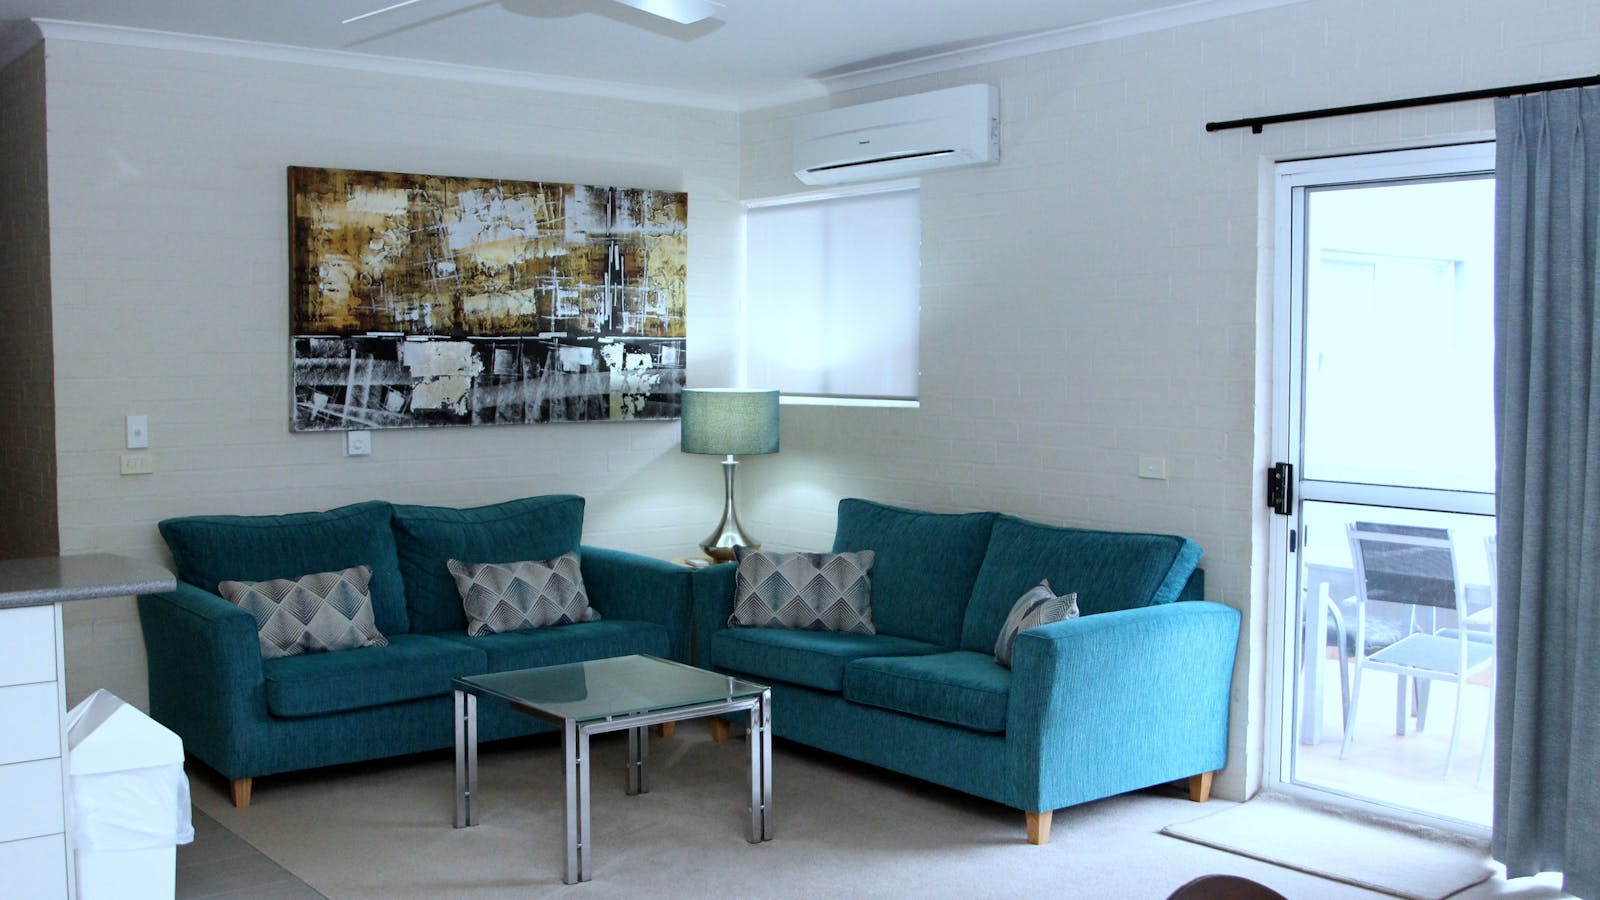 Lounge area of two bedroom apartment